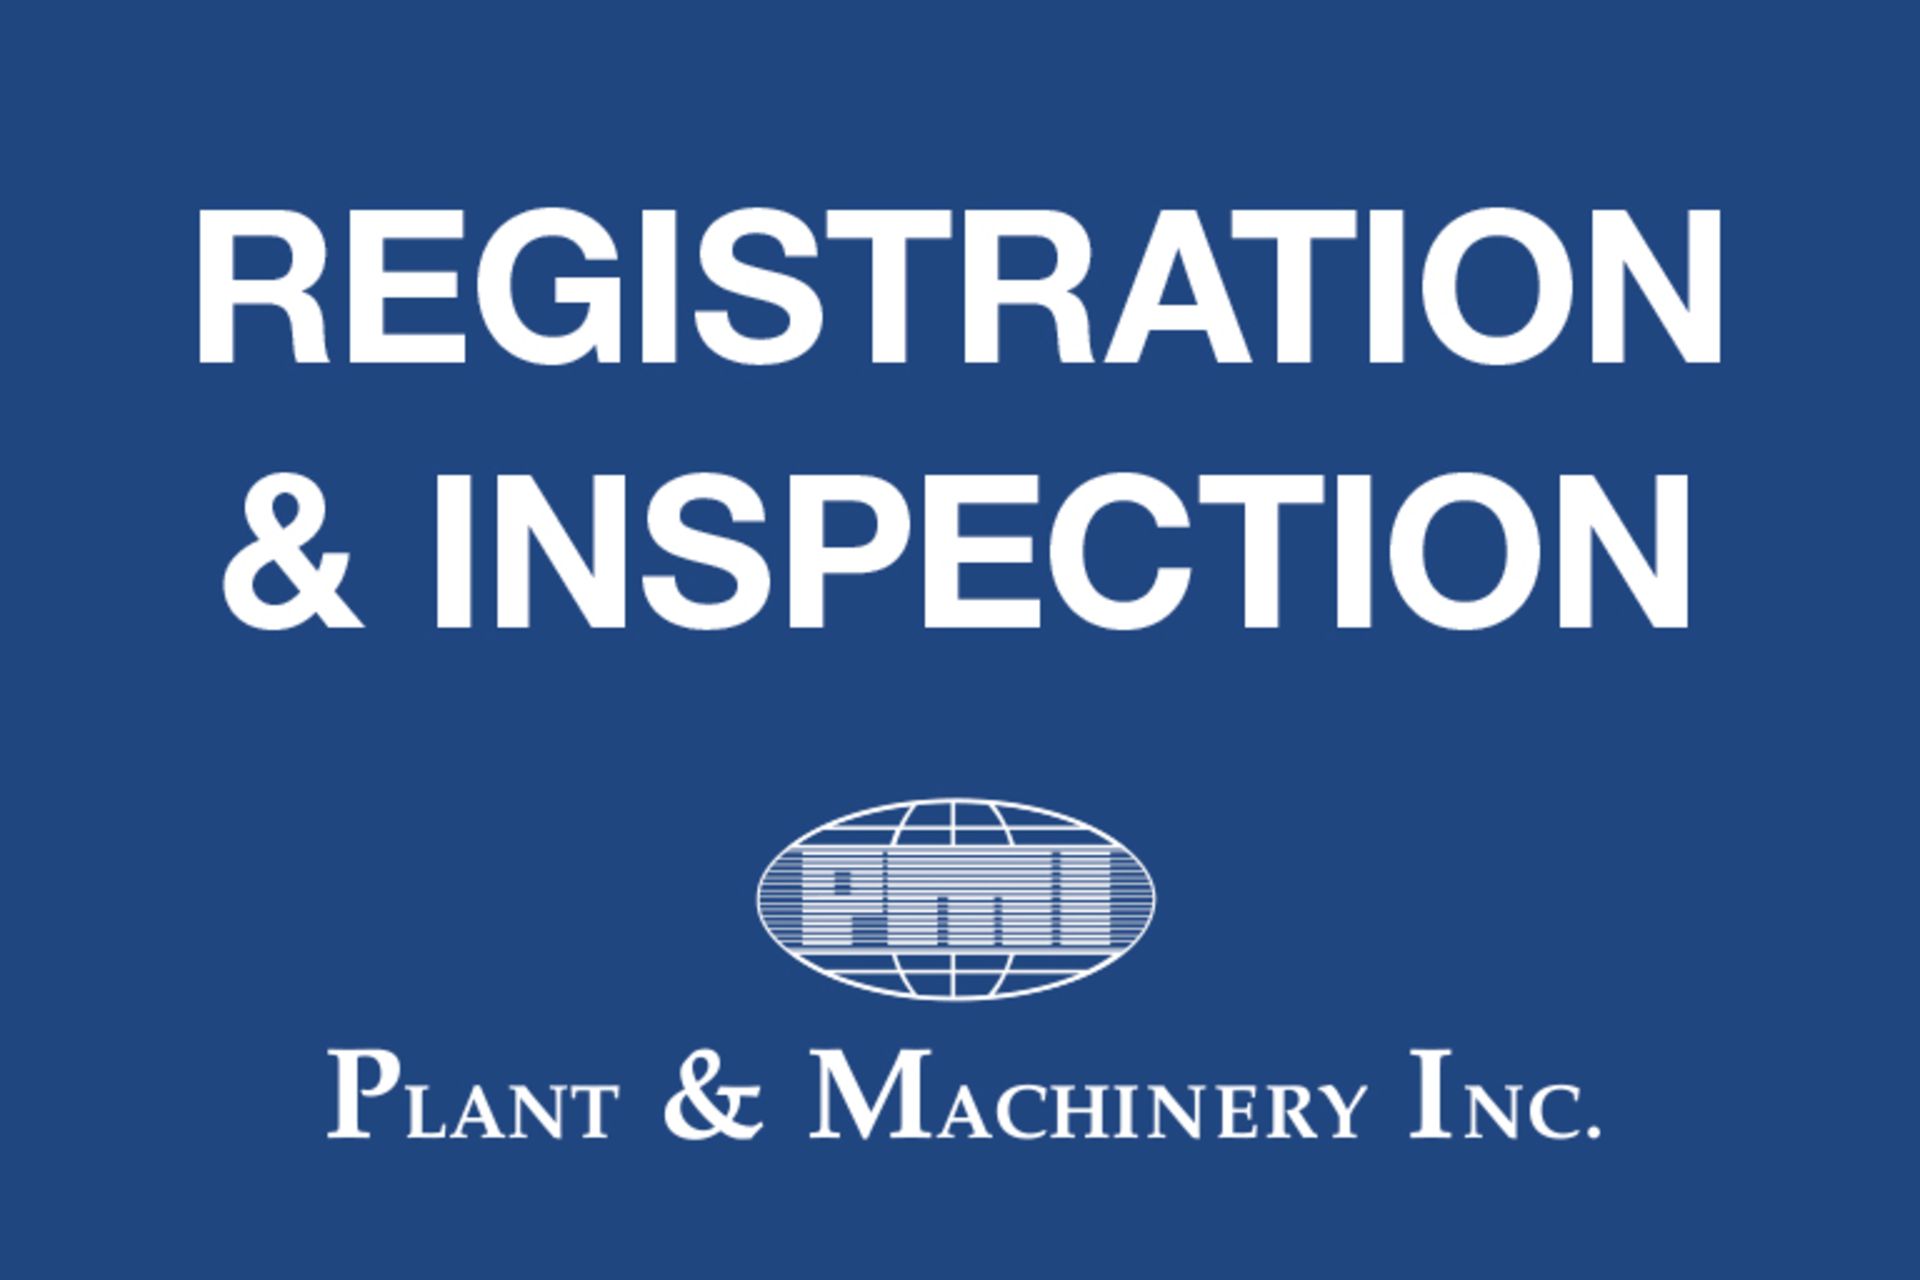 INSPECTION FOR THIS AUCTION WILL BE MONDAY, MAY 6 AND TUESDAY, MAY 7, FROM 9:00 A.M. TO 4:00 P.M.